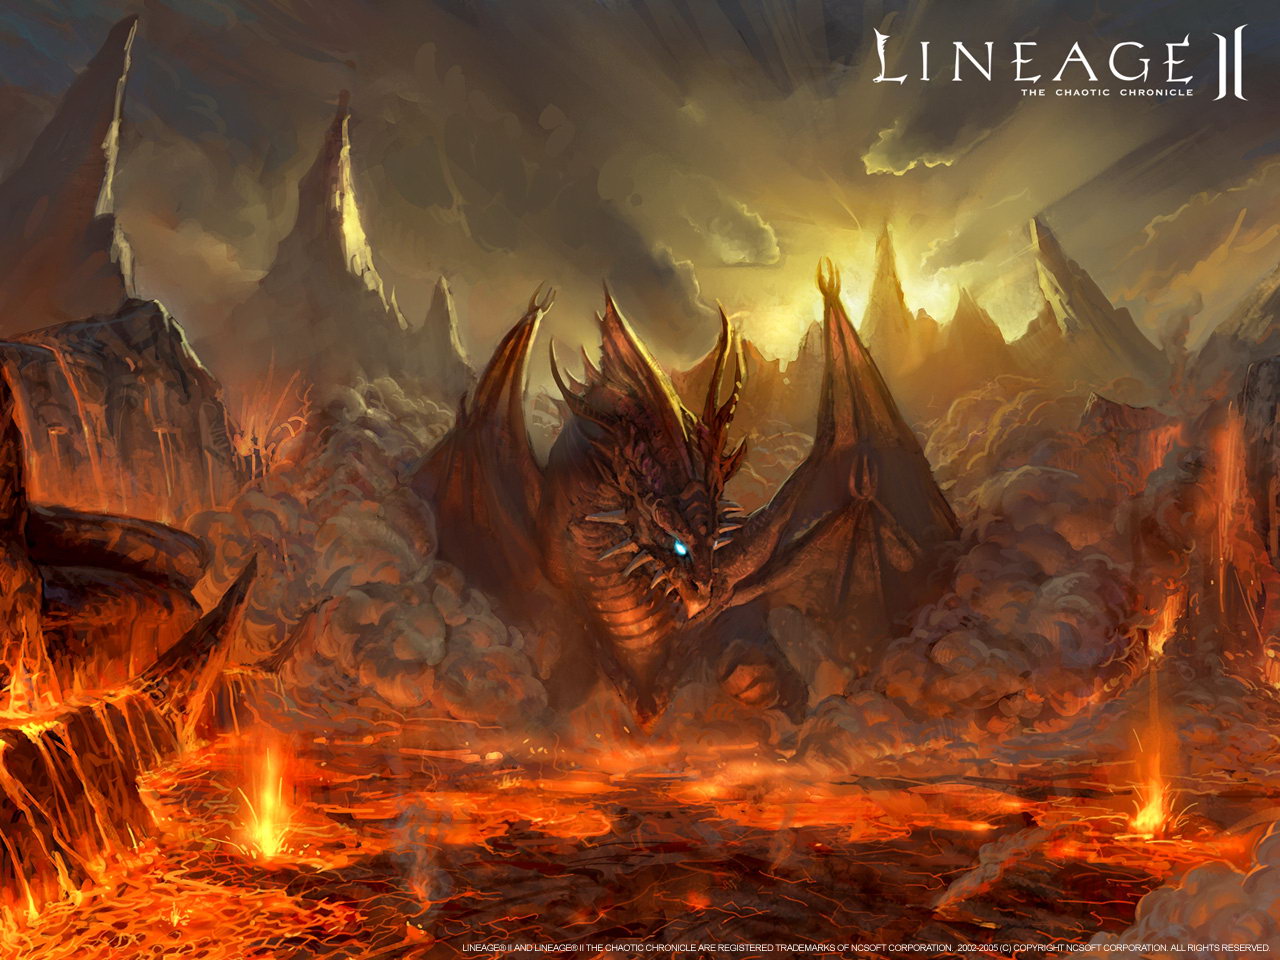 Download High quality Lineage 2 The Chaotic Throne wallpaper / Games / 1280x960